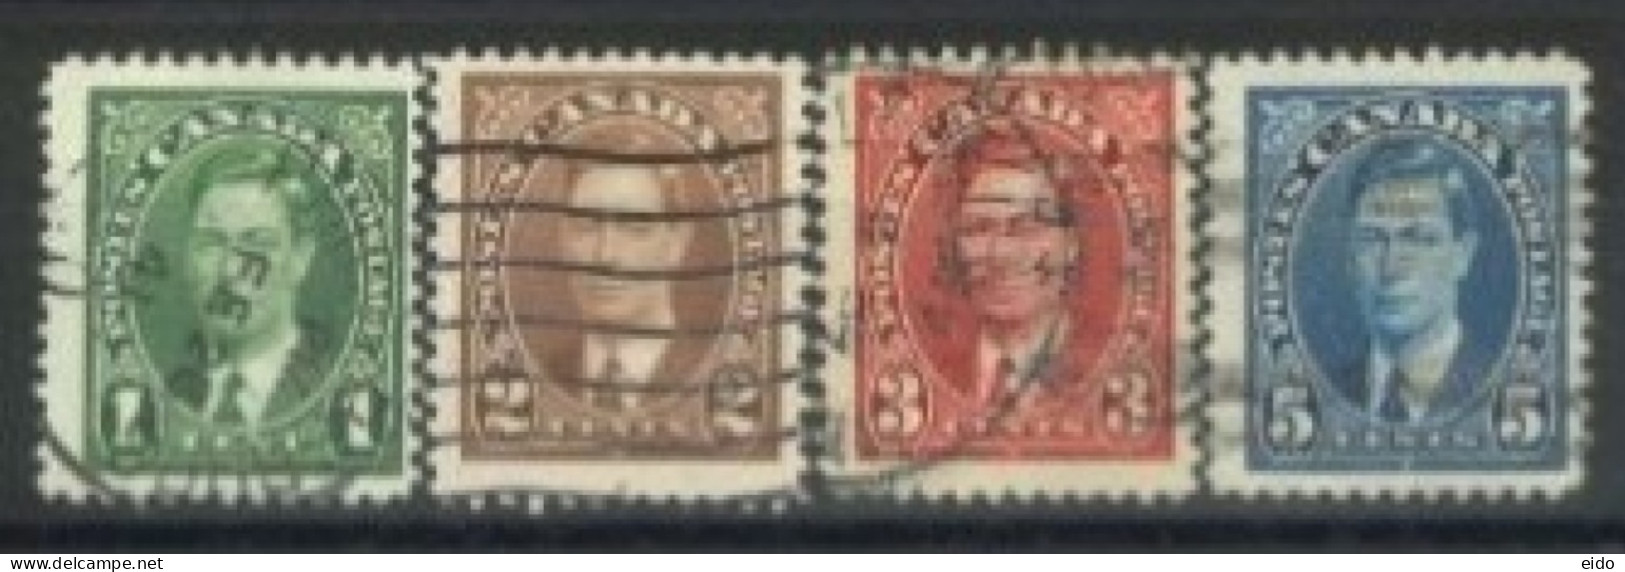 CANADA - 1937, KING GEORGE VI STAMPS SET OF 4, USED. - Gebraucht